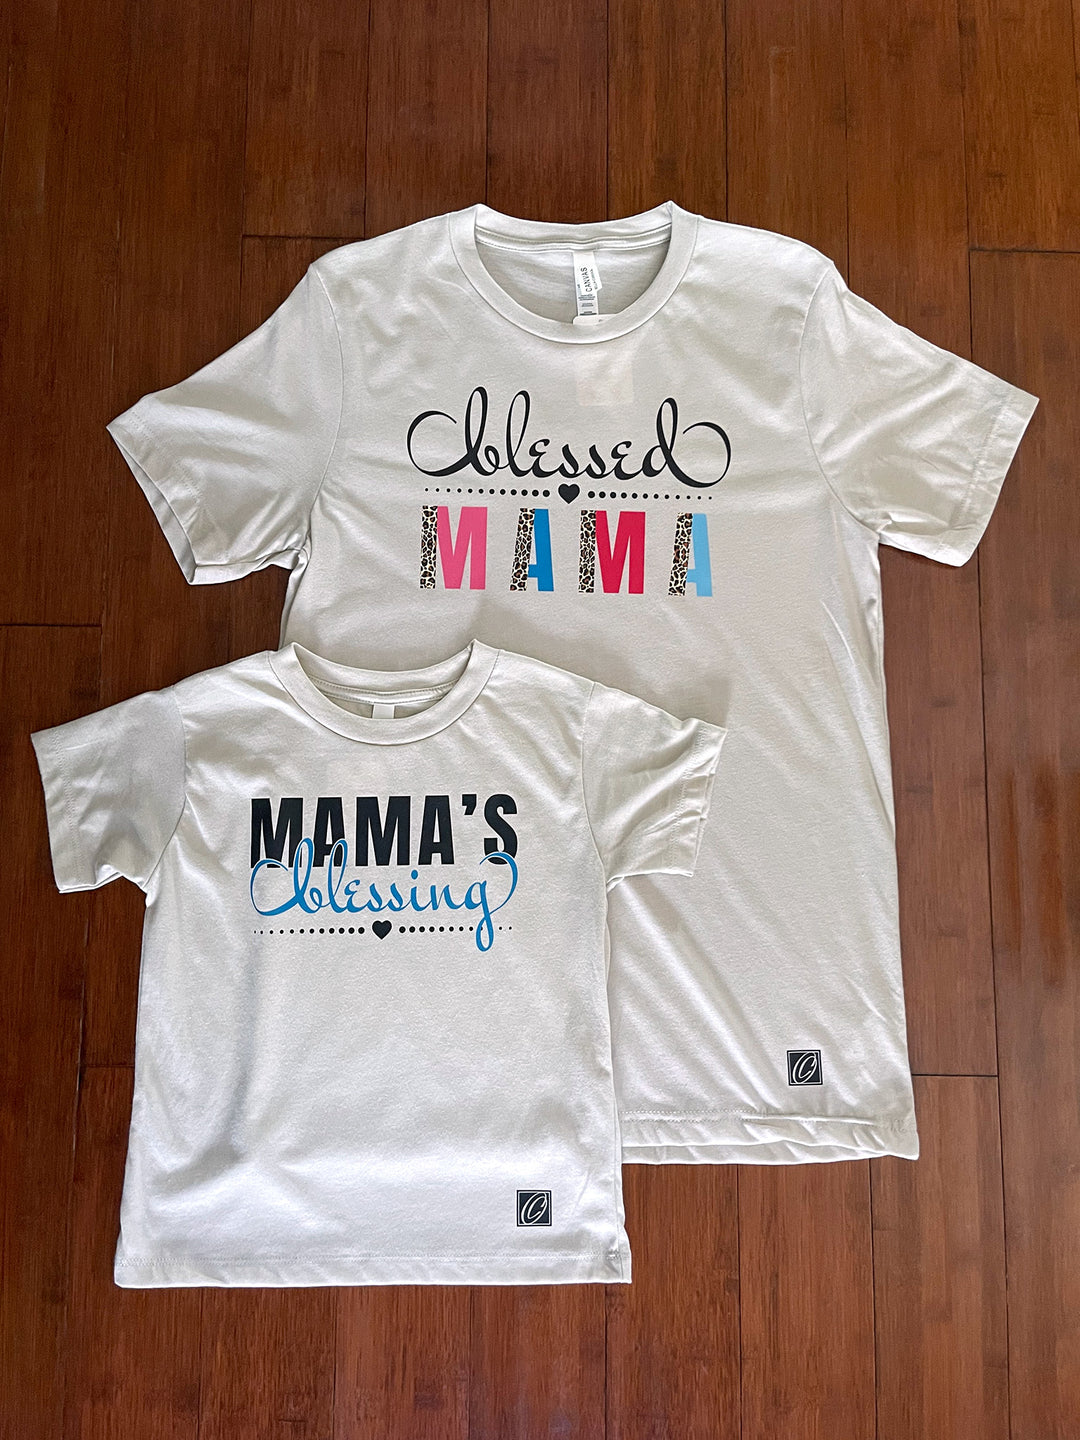 Adult M & Toddler 5T Bella Canvas Heather CVC Crewneck Short Sleeve Tee Set - Blessed Mama/Mama's Blessing